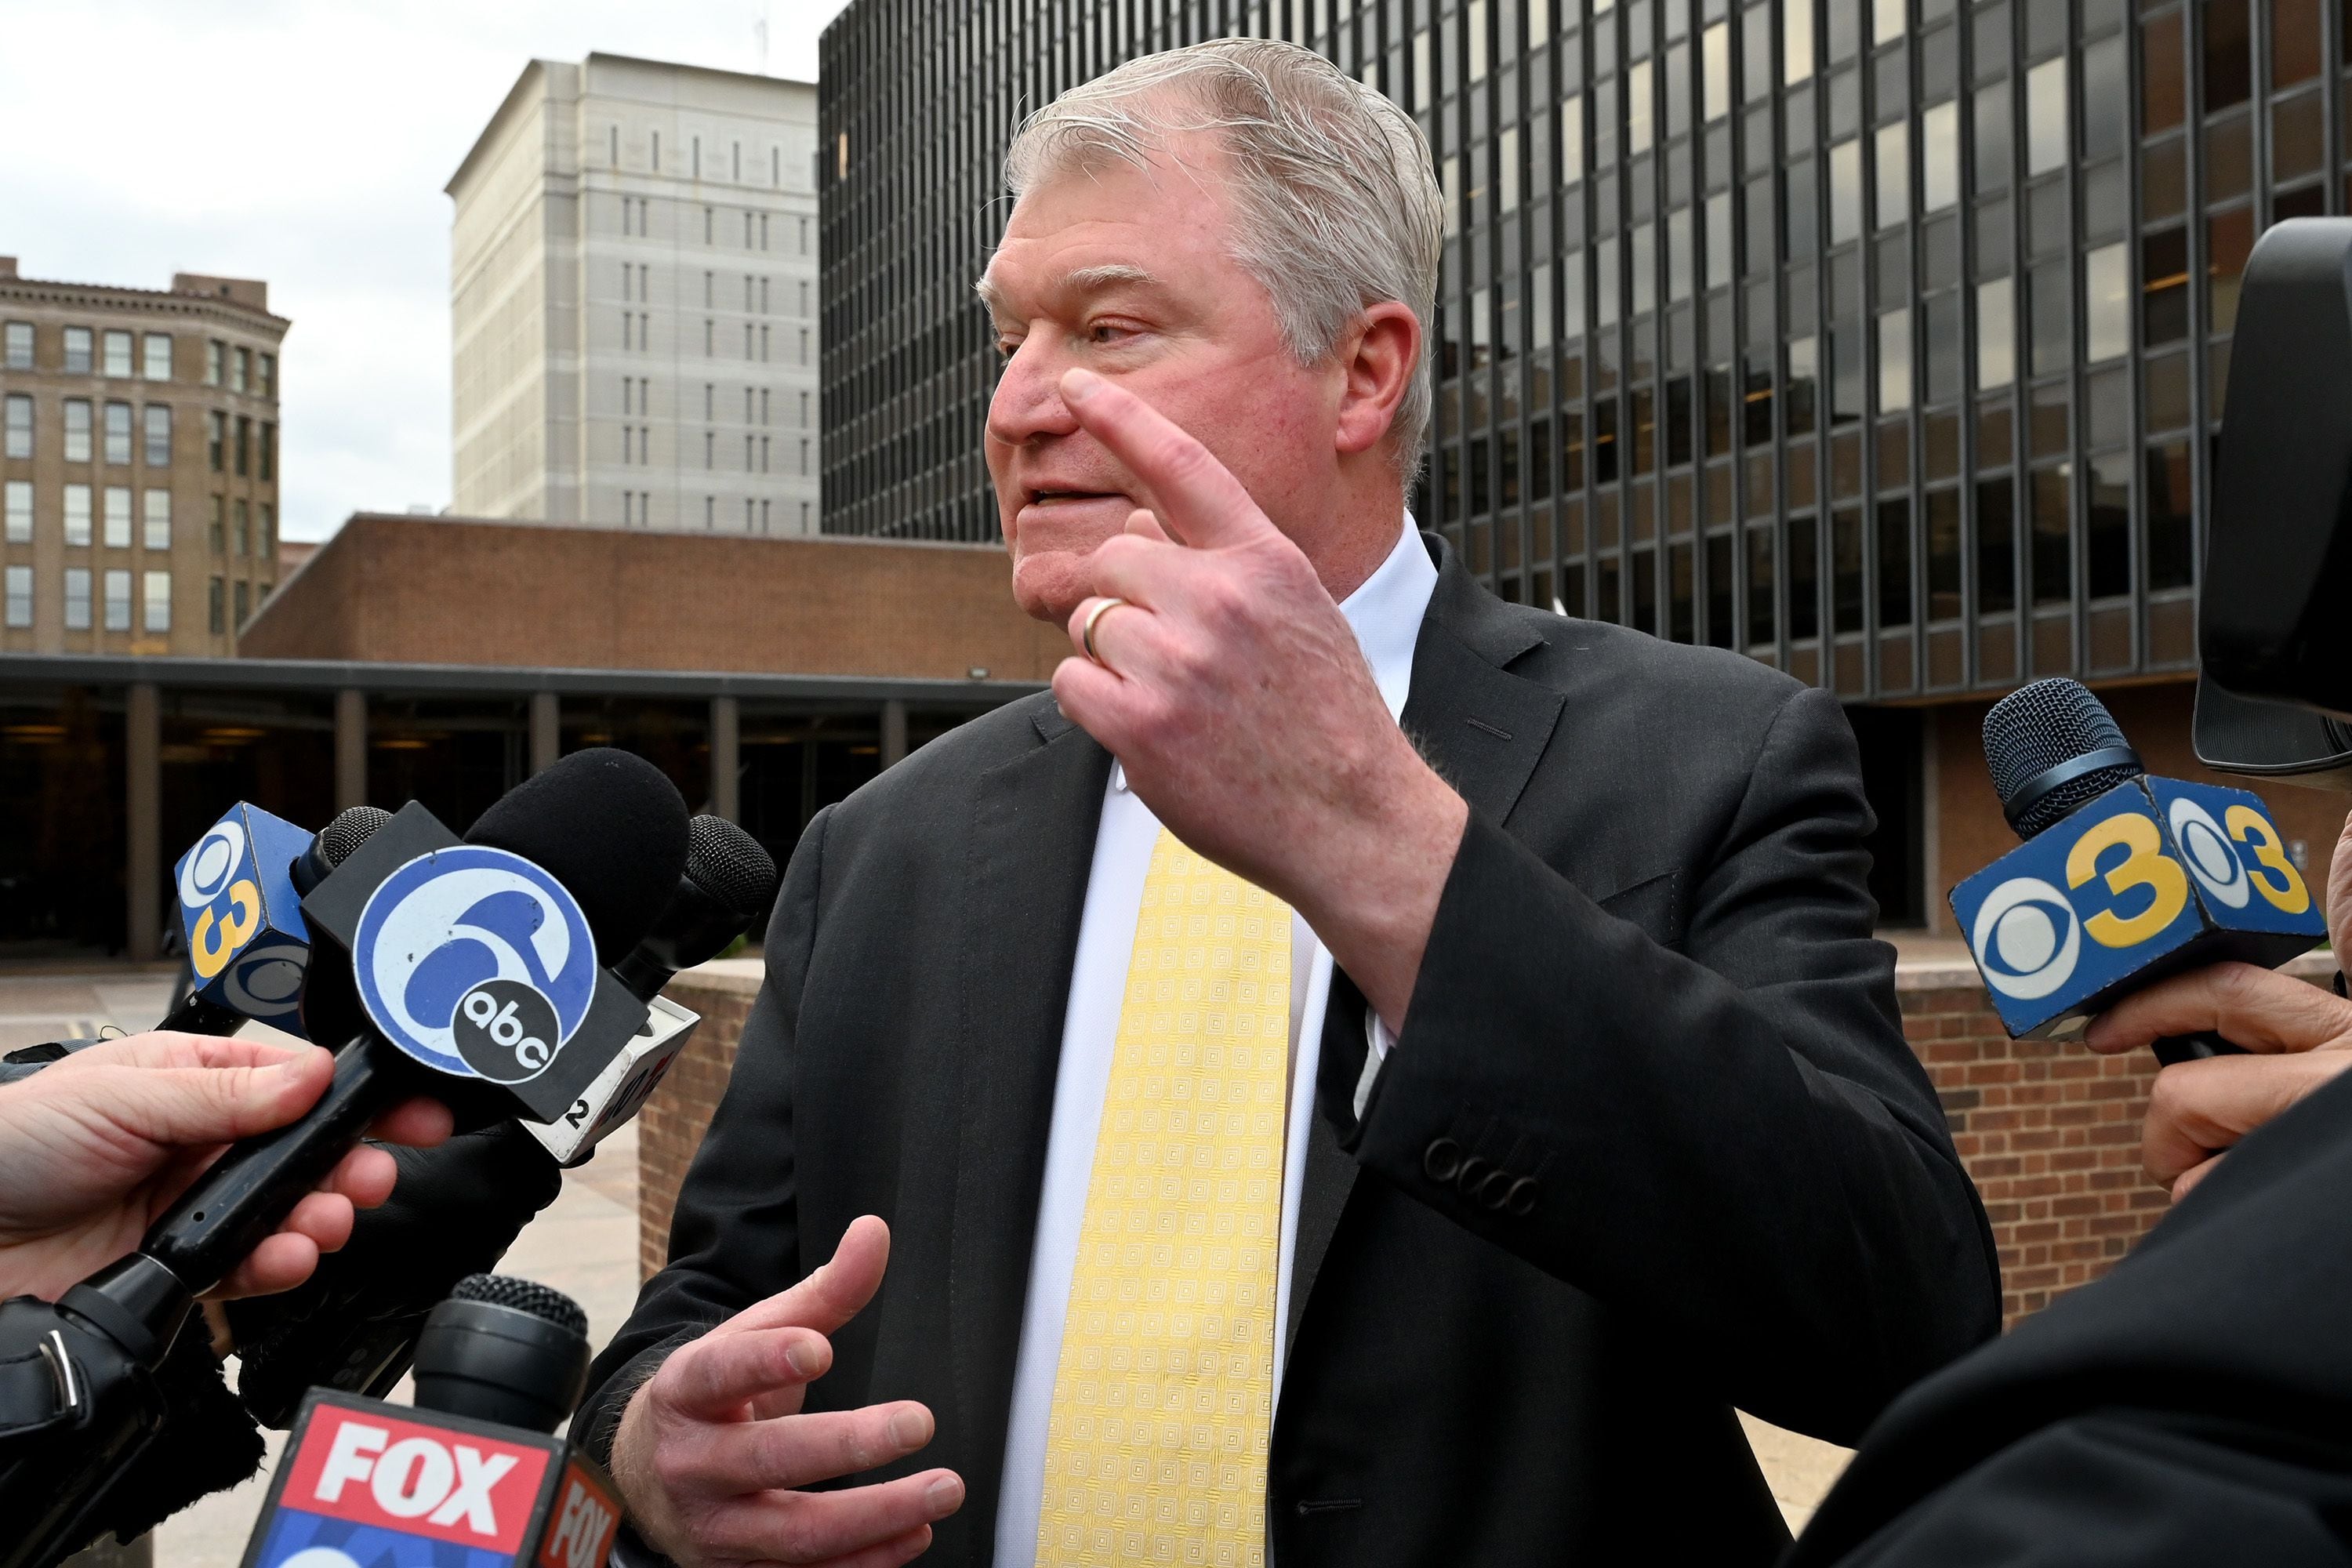 John Dougherty resigns as head of IBEW Local 98 after conviction on  corruption charges